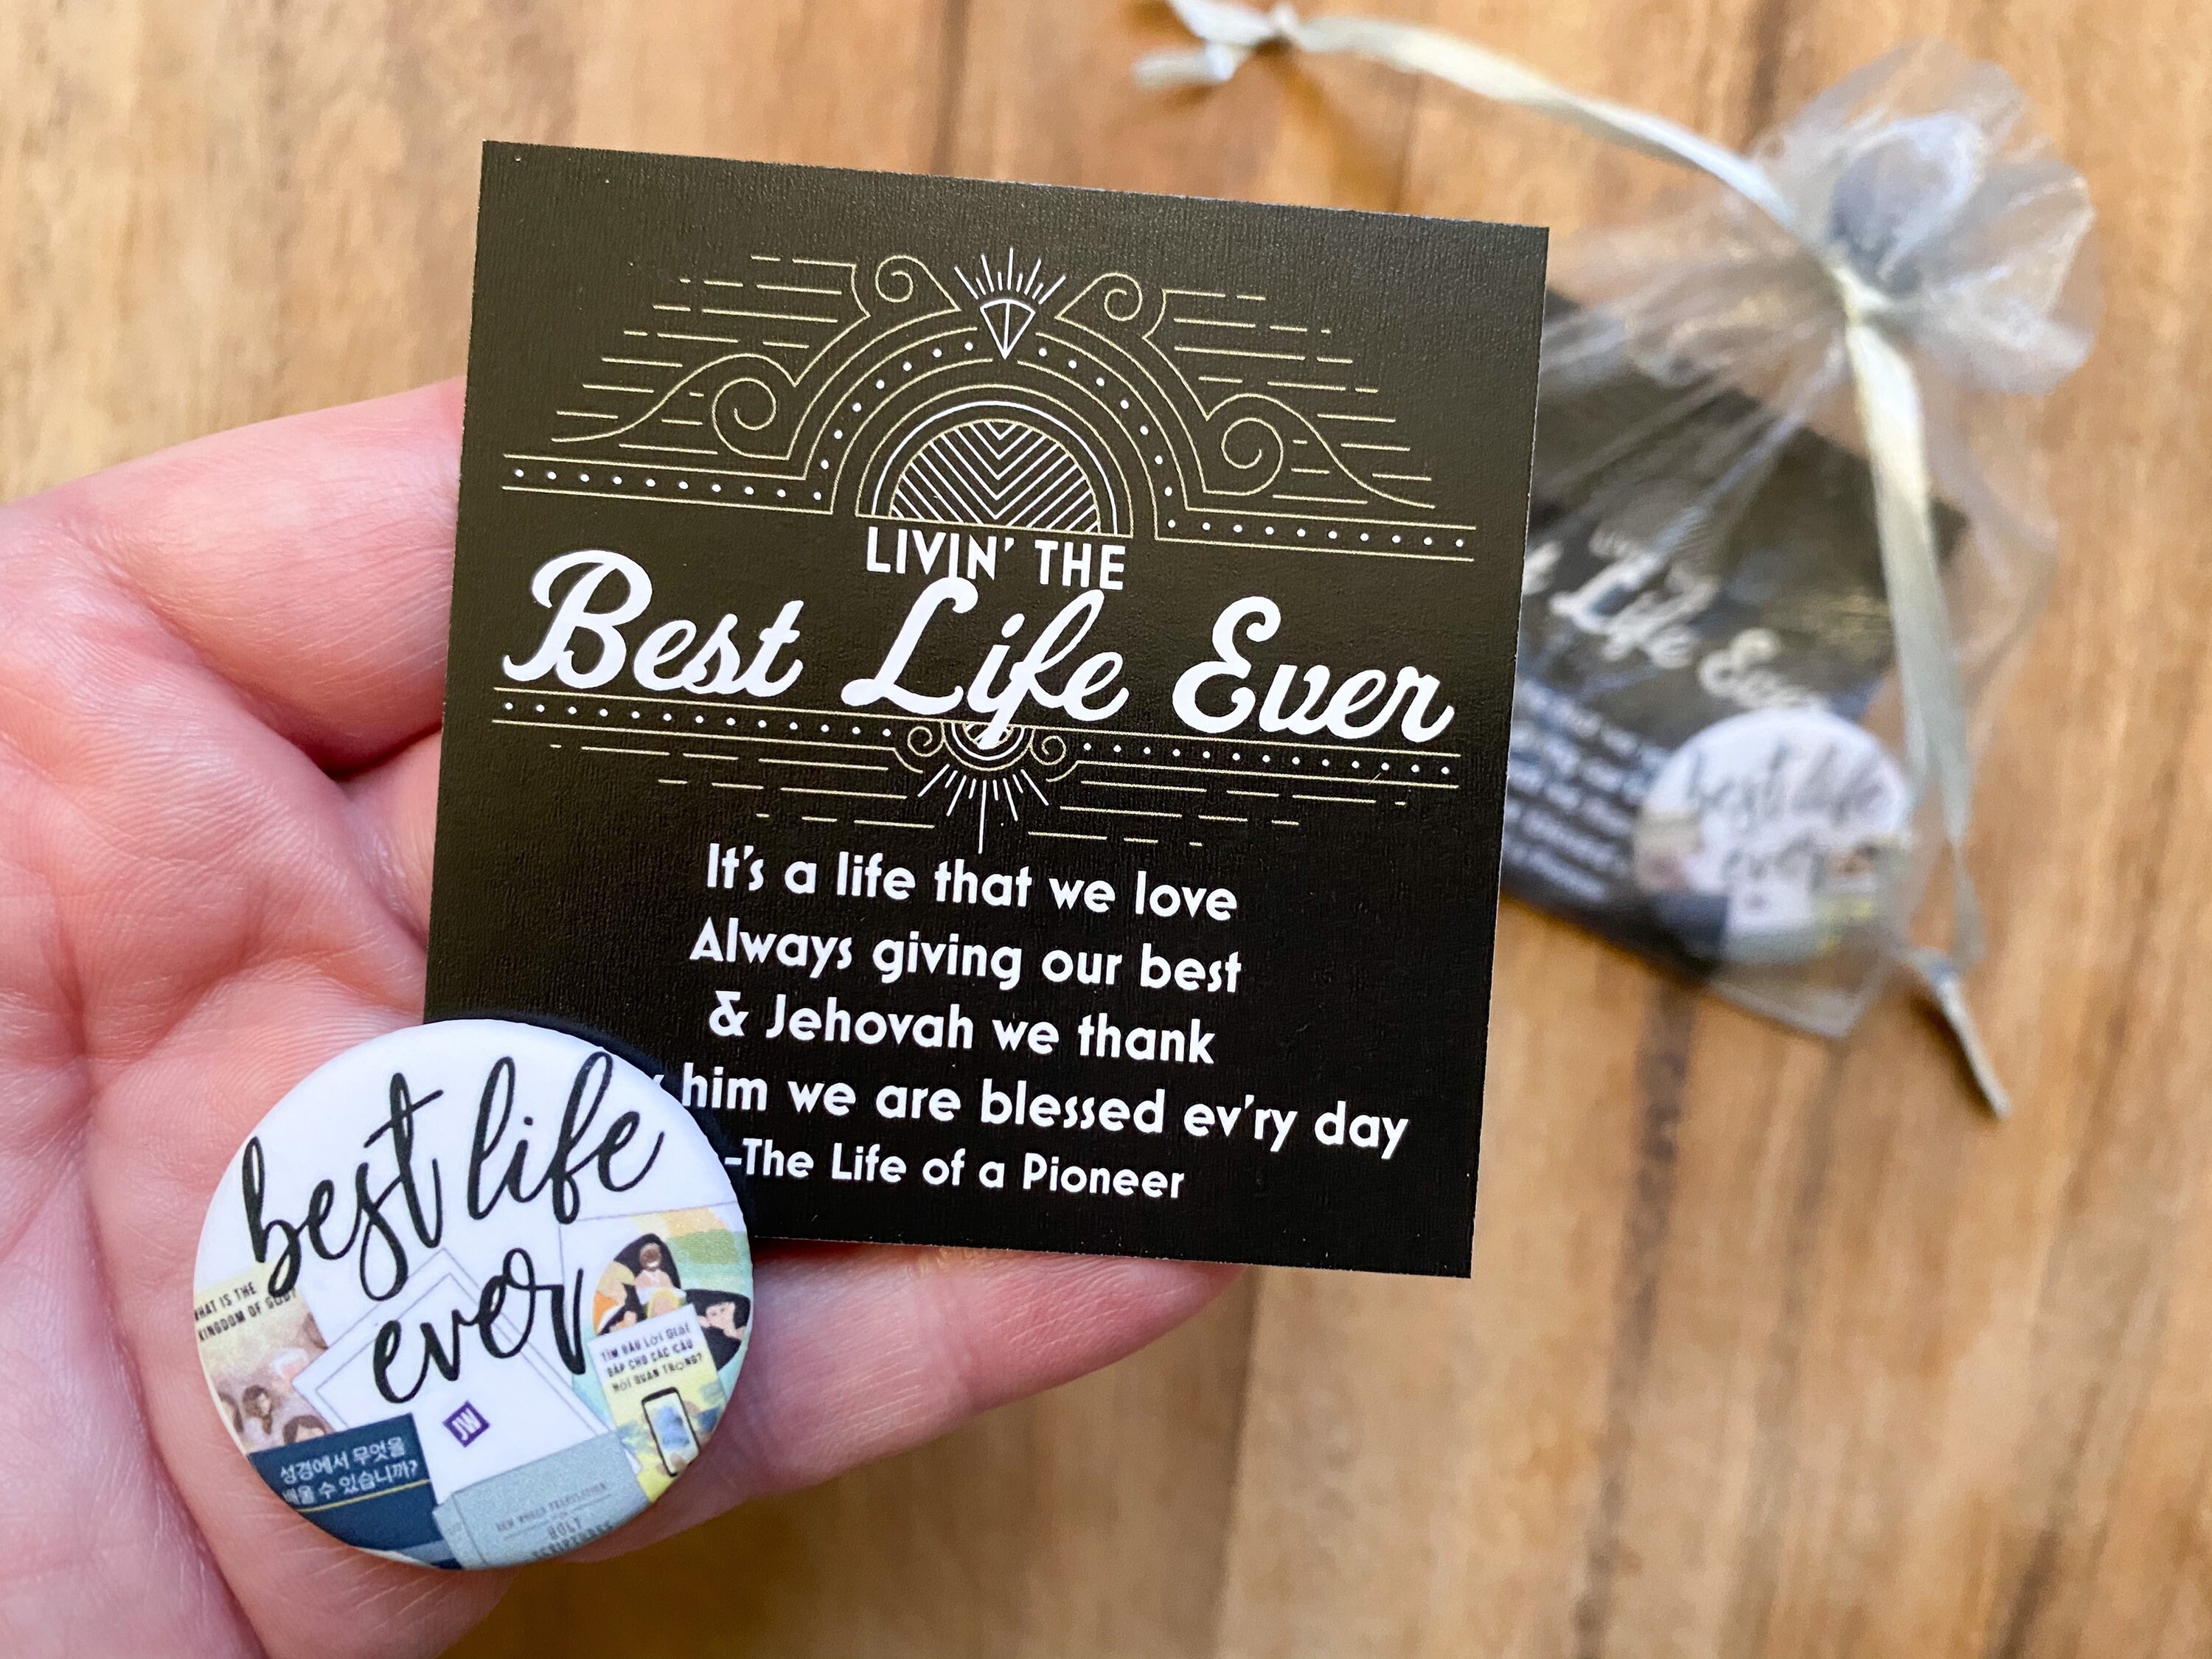 Jw Gifts/1.5 Pin, Magnet, Keychain, Bag Accessory/'it's The Life That We  Choose; For Jehovah Live'/Pioneer Gift/Jw.org/Jw Ministry - Yahoo Shopping